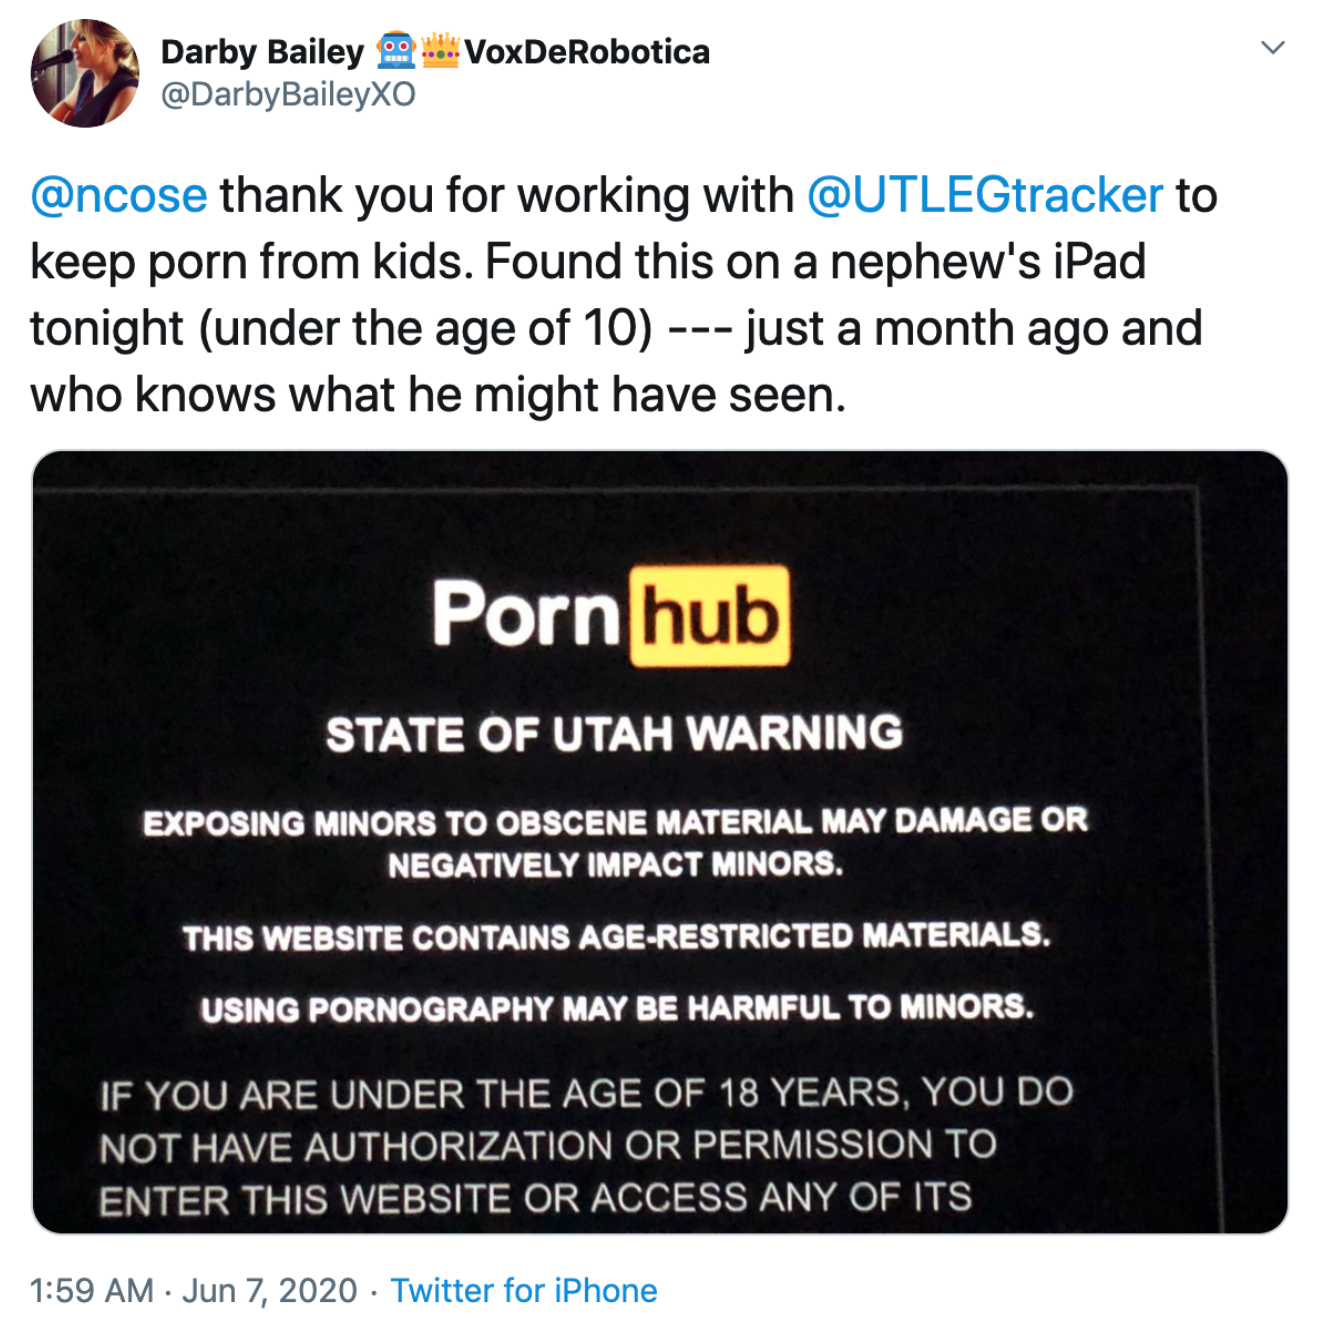 Tweet about warning label for online porn in Utah from @DarbyBaileyXO